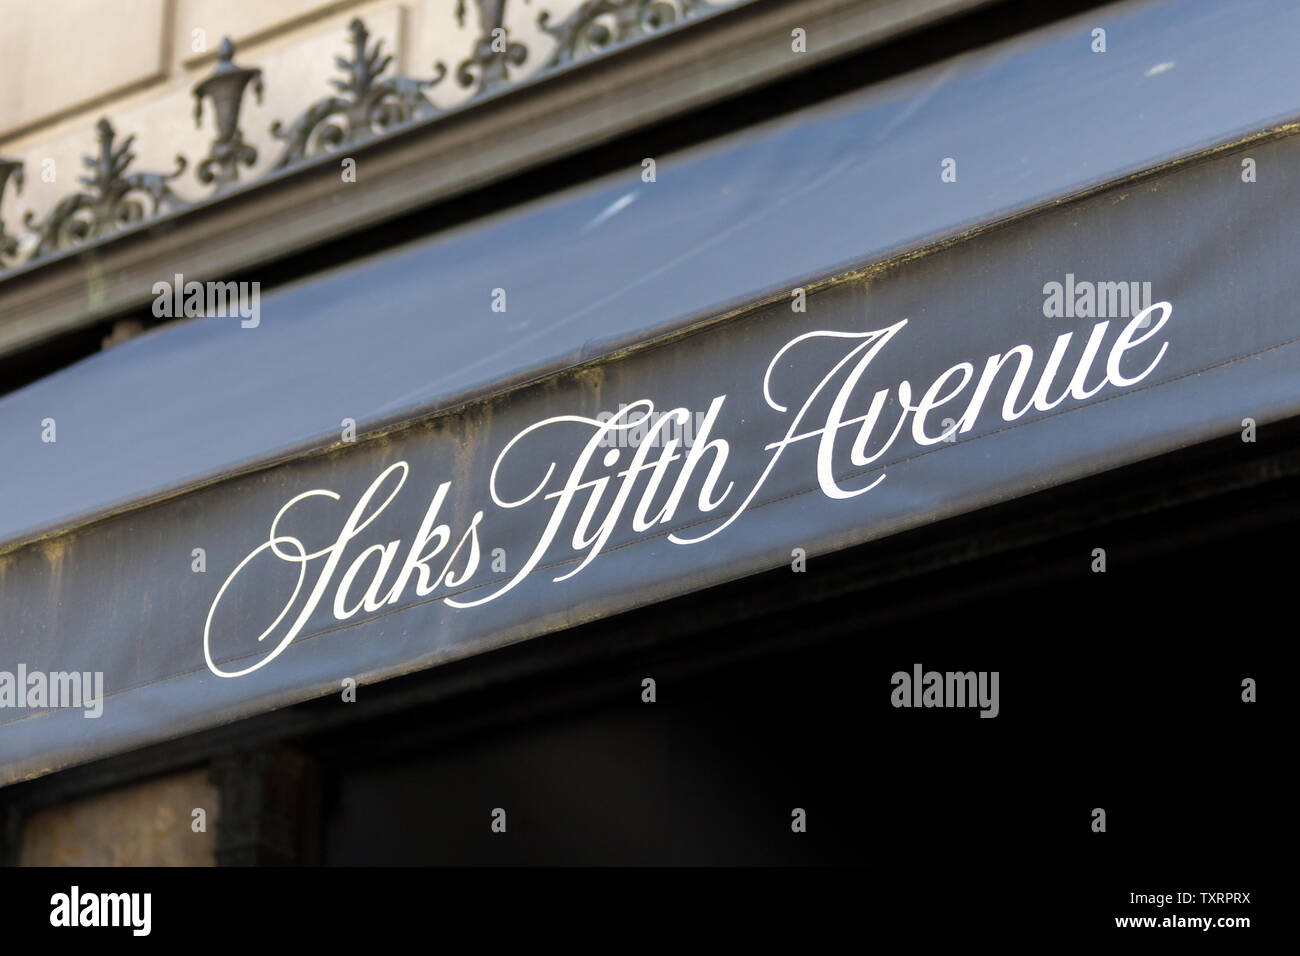 NEW YORK, USA - MAY 15, 2019: Saks Fifth Avenue on Fifth Aveneue in New York, USA, American chain of luxury department stores Stock Photo